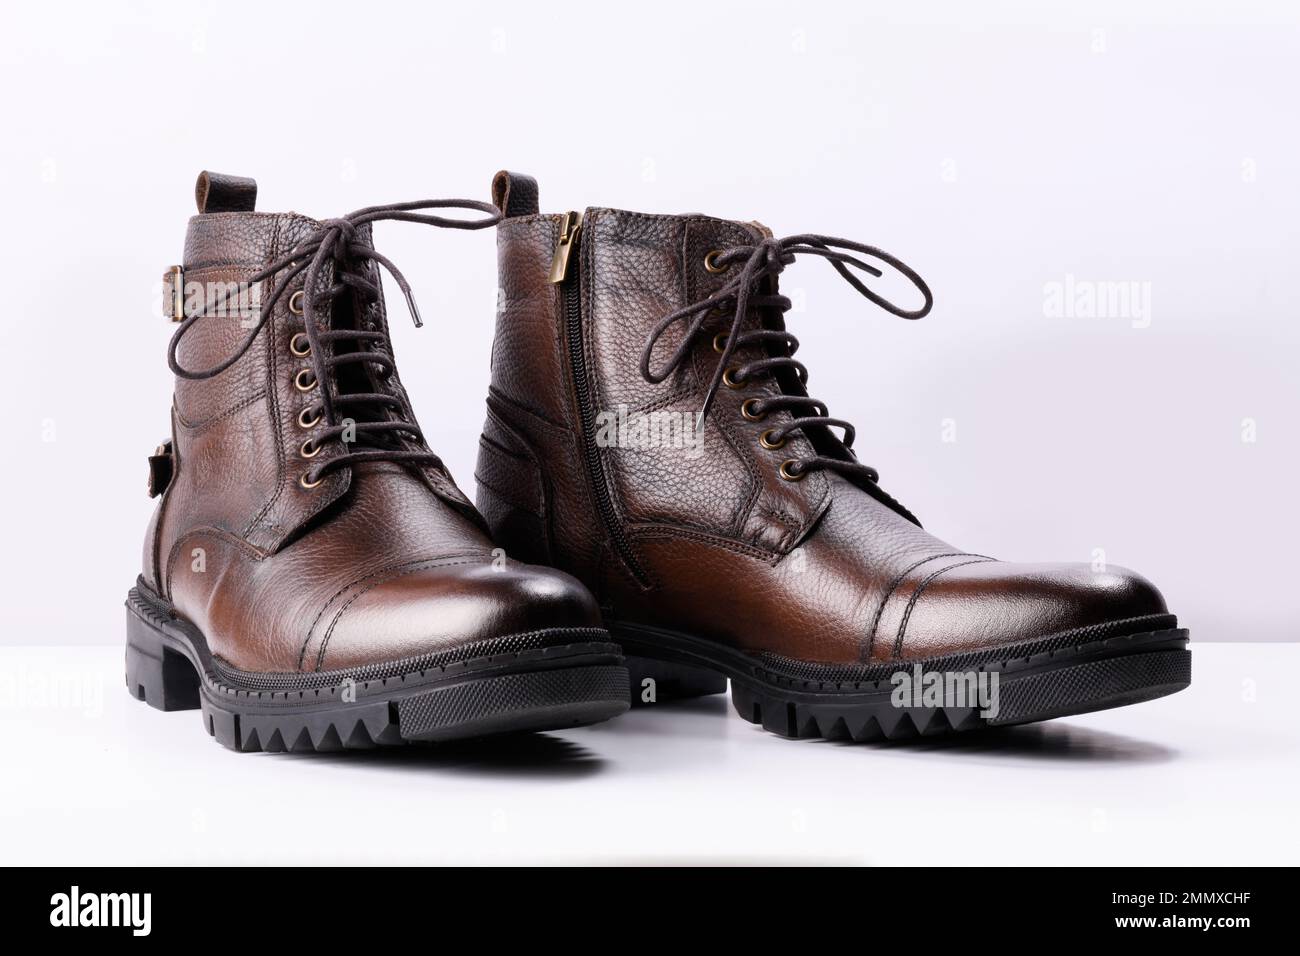 A pair of brown colored leather boots on a white background. Stock Photo